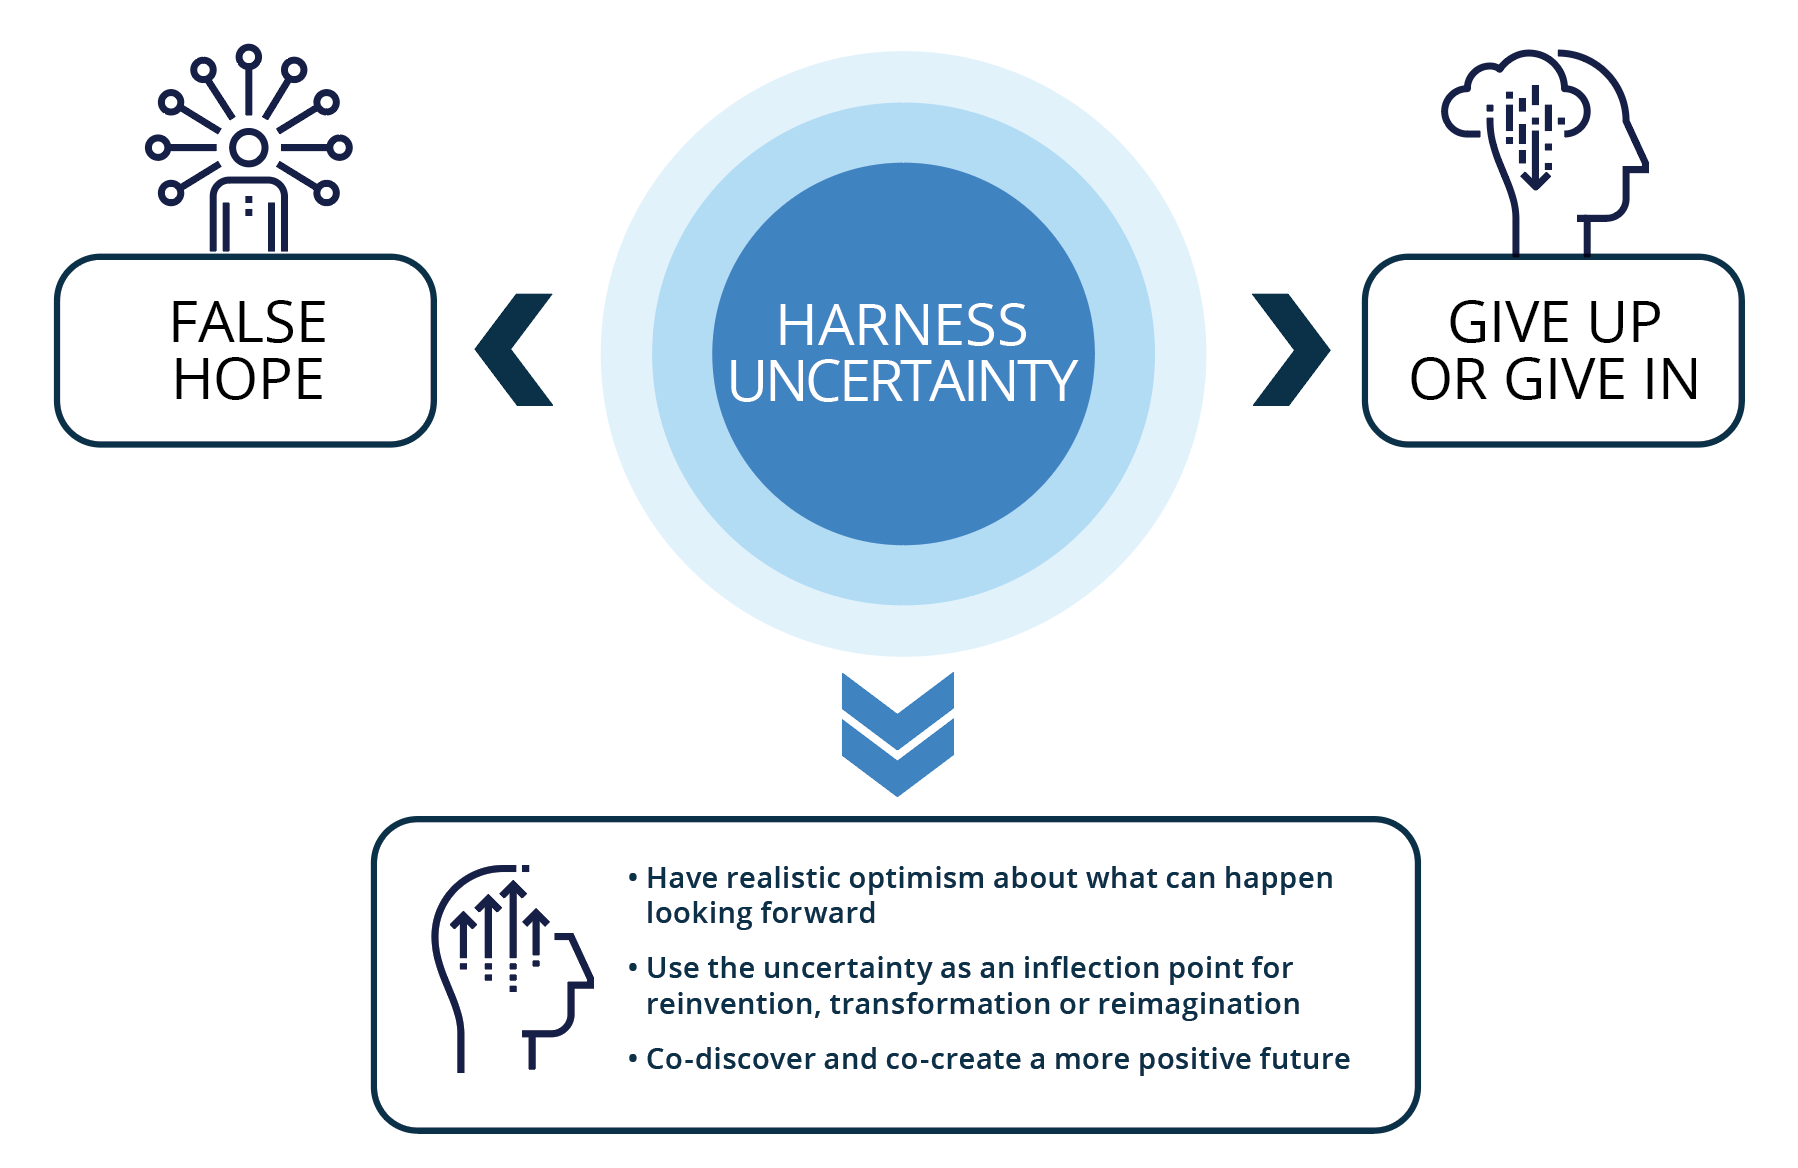 Responses to Uncertainty: Harness Uncertainty